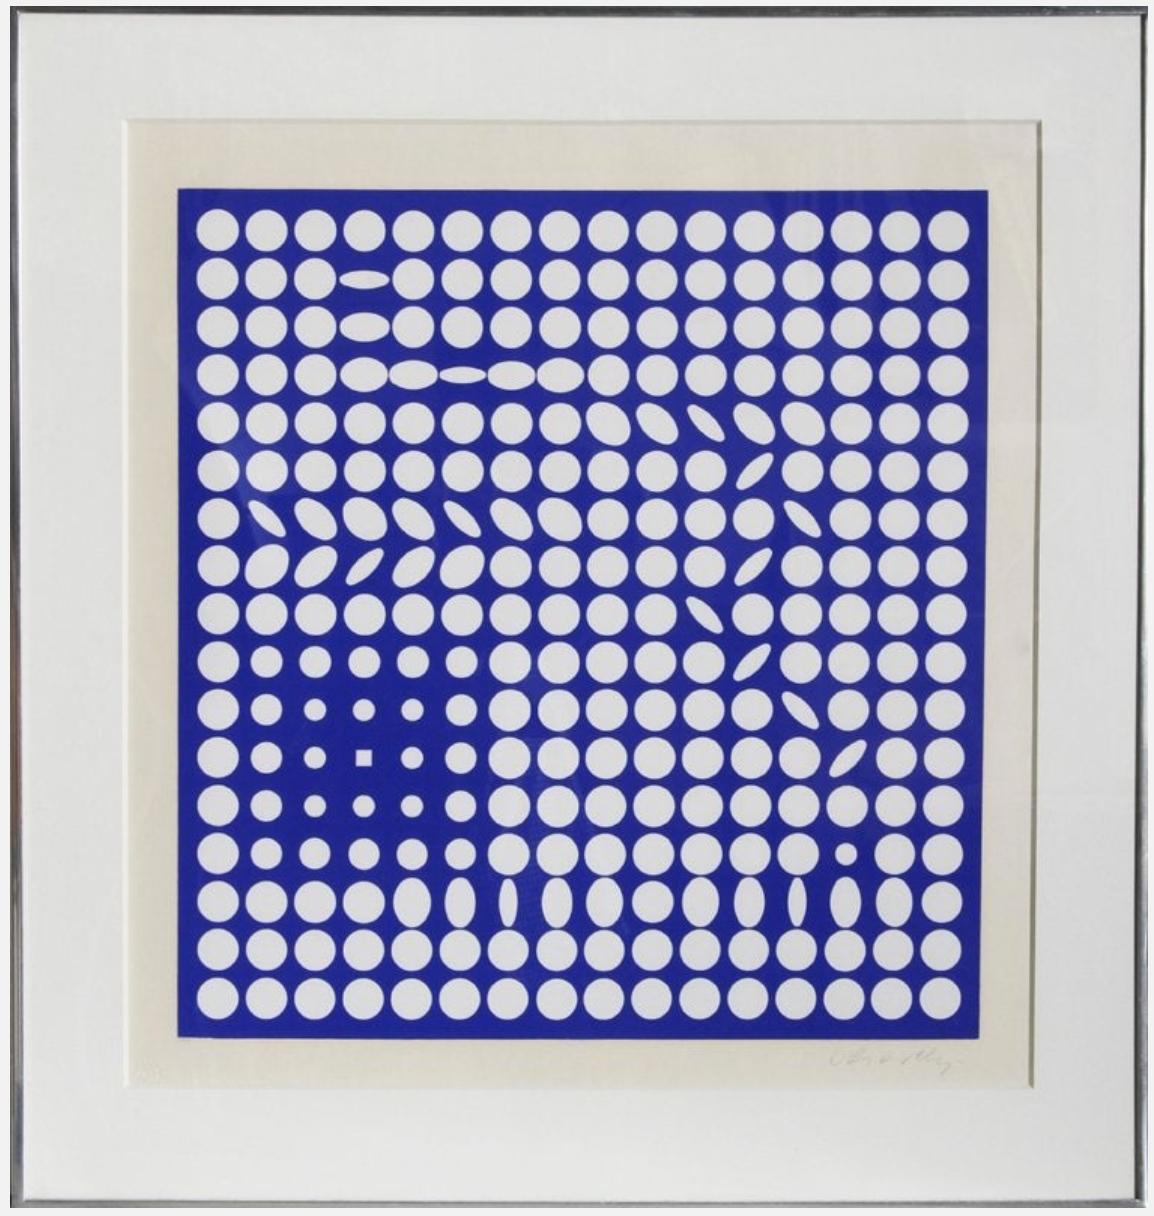 A square silkscreen print on paper in blue and white by famed French Op artist Victor Vasarely. The abstract pattern print, 49 in an edition of 50, gives a sense of movement as white circles seem to rotate into discs and recede into the deep and